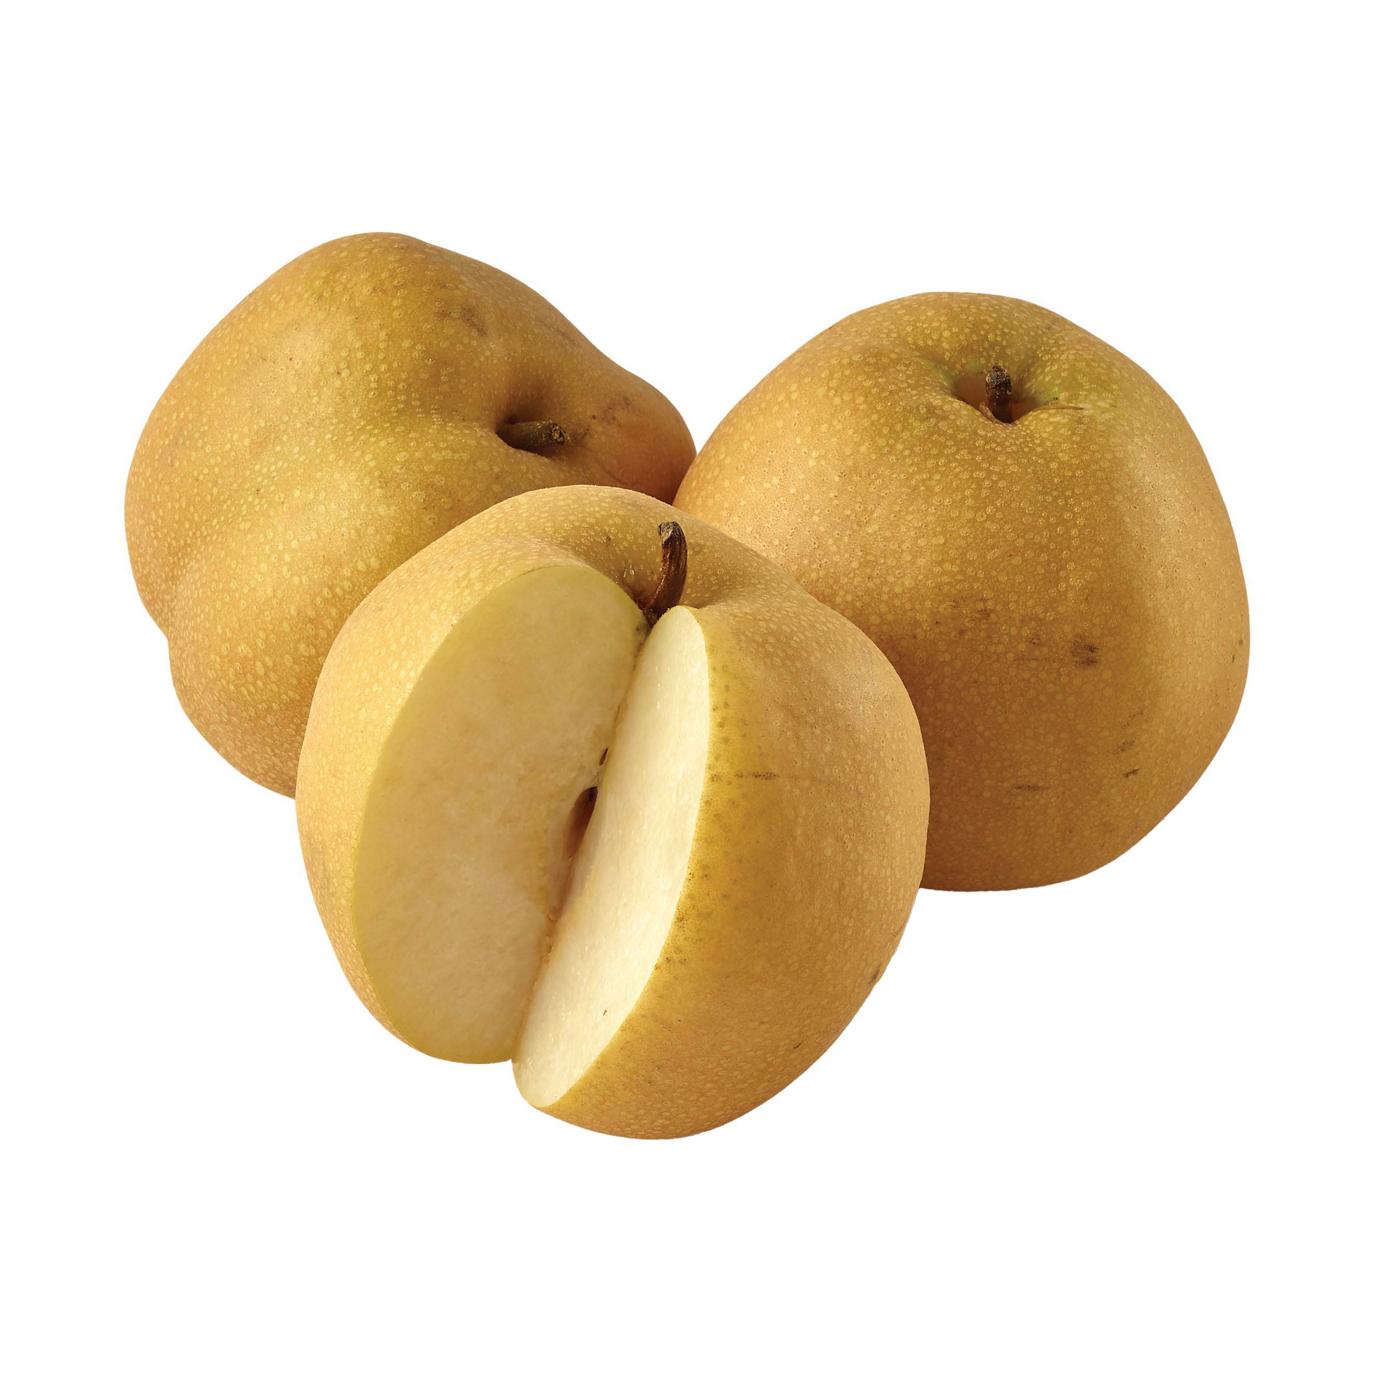 types of asian pears